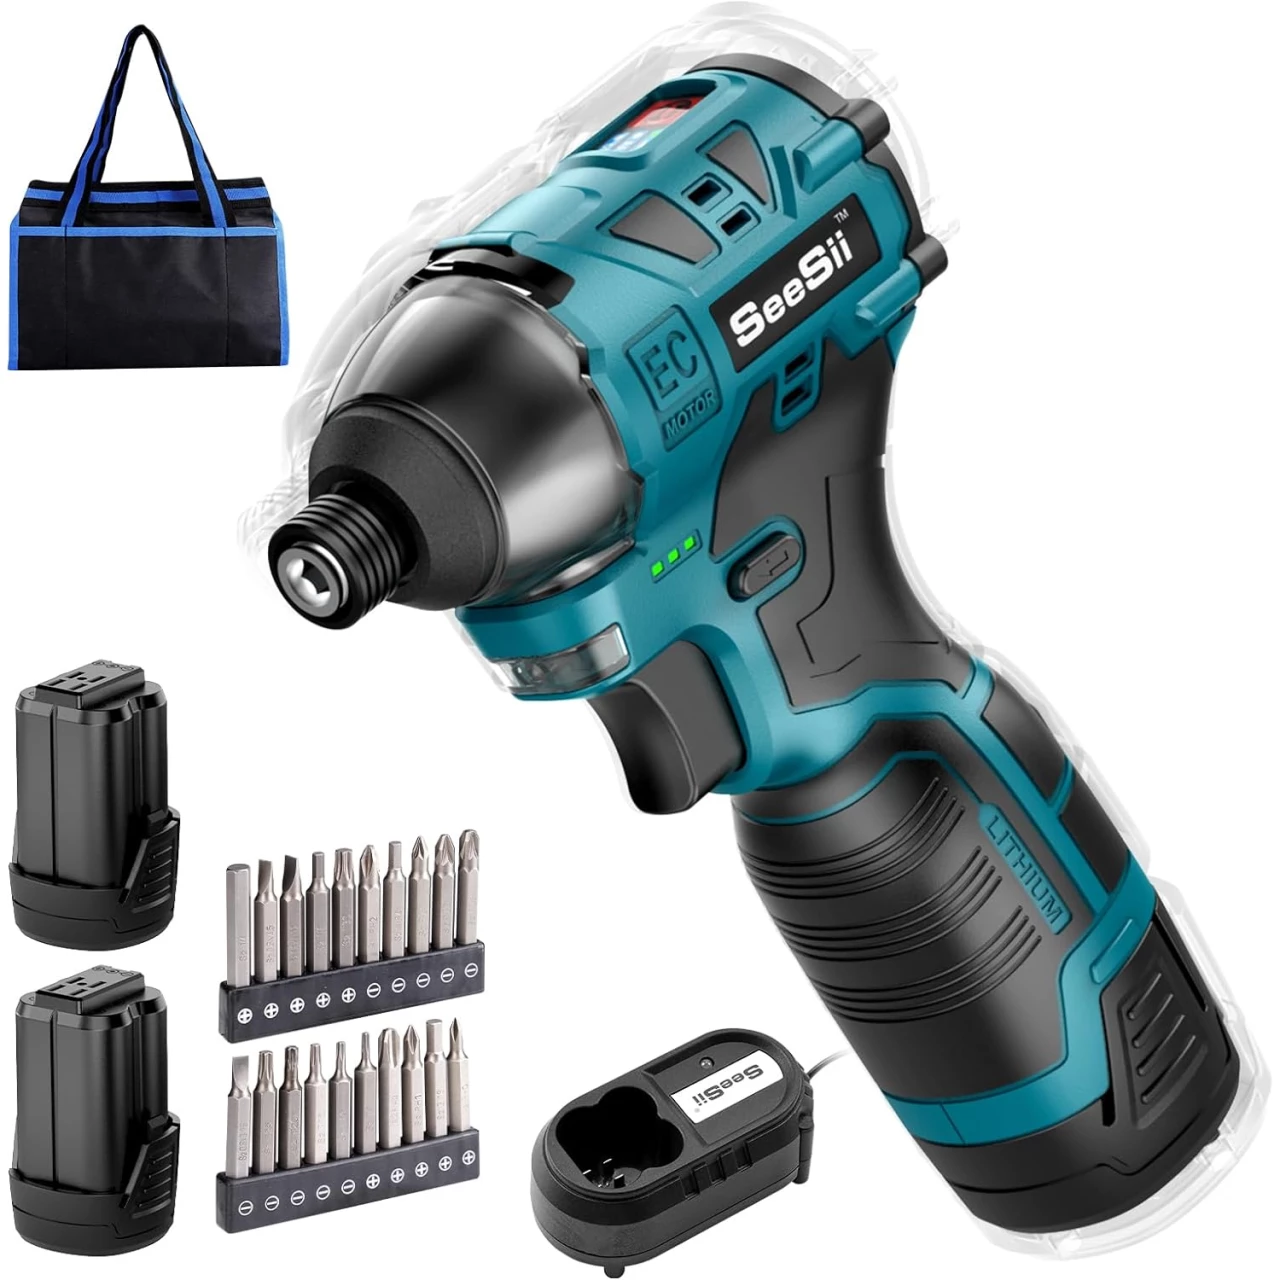 Impact Driver Kit,Seesii 16V Cordless Impact Driver Set w/Max Torque 1240 In-lbs,1/4&quot; Hex Chuck Power Impact Driver w/Two 2.0Ah Battery,0-2700RPM Variable Speed,20Pcs Driver Bits